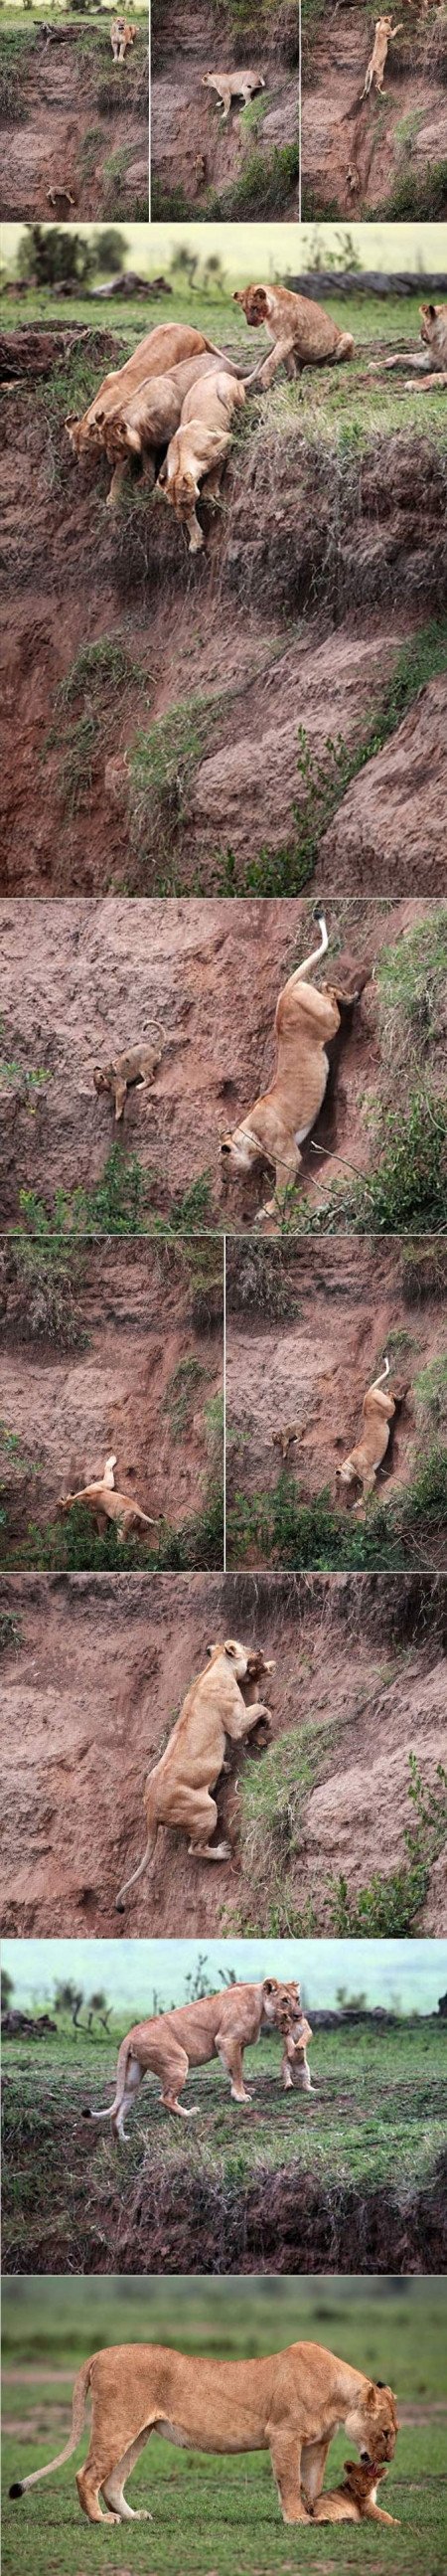 Momma lion saves her cub.